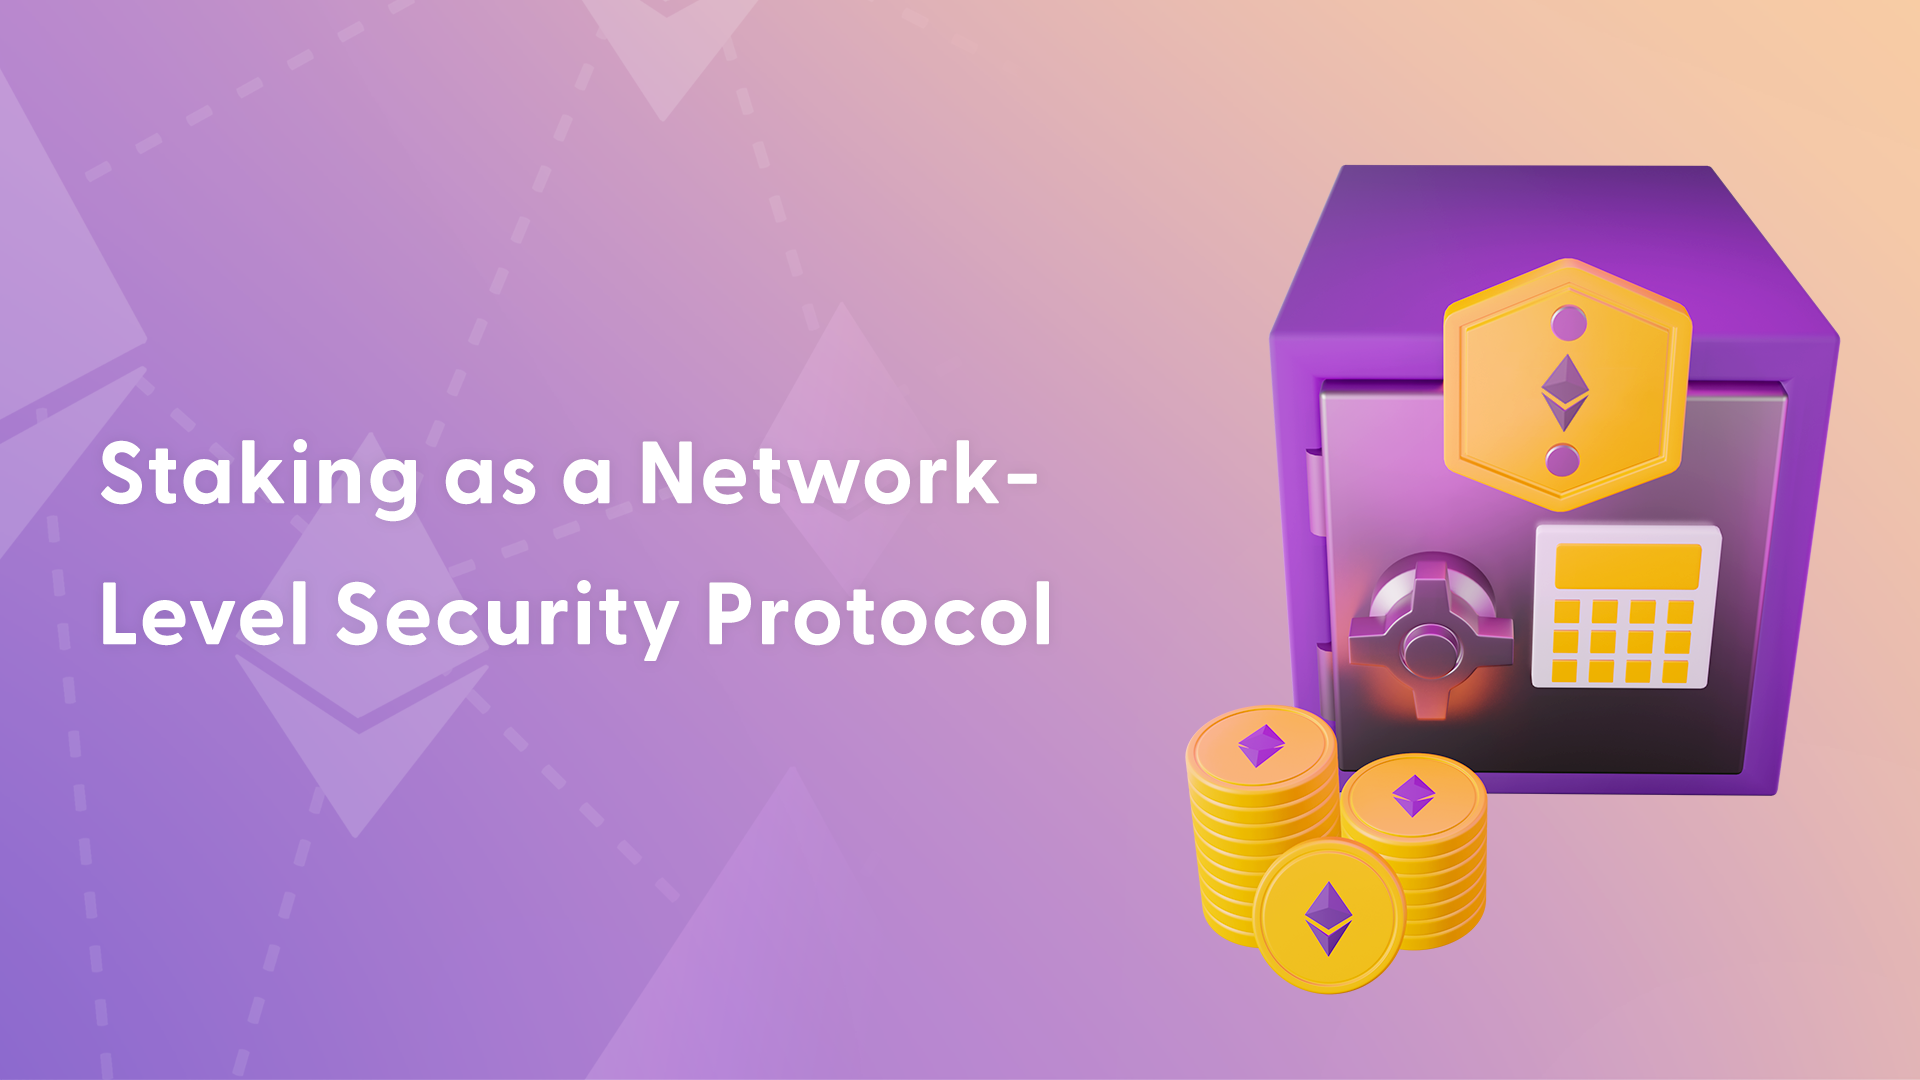 Staking as a Network-Level Security Protocol